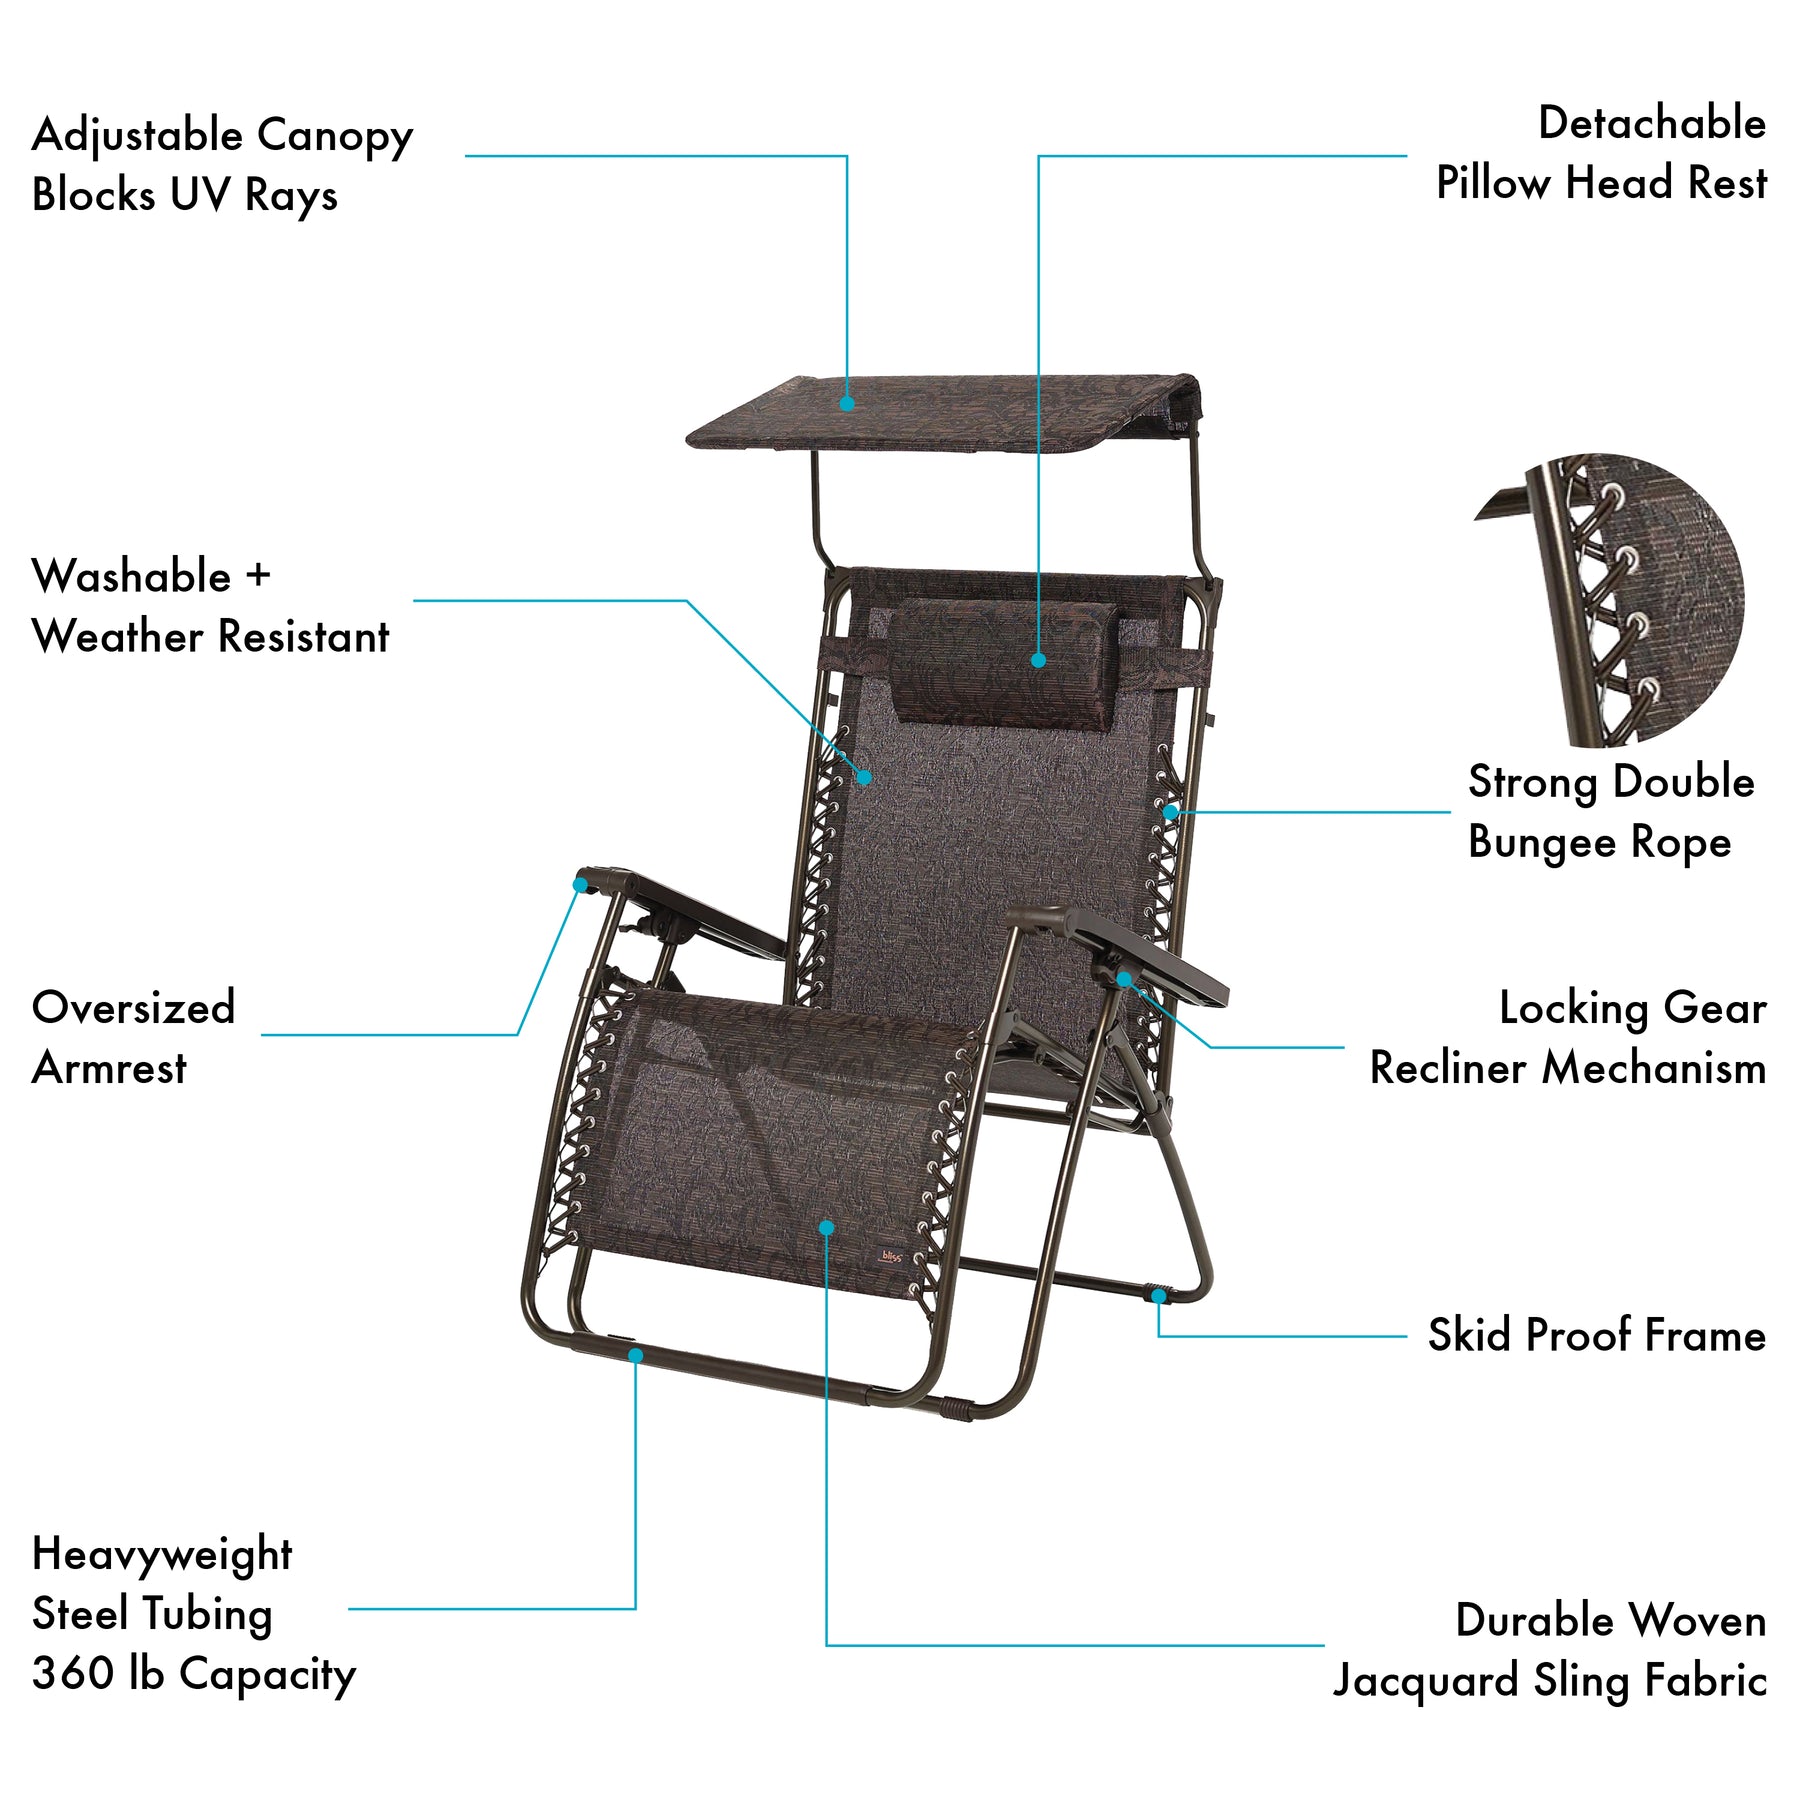 Bliss Hammocks 30-Inch Gravity Free Chair Features: adjustable canopy, detachable pillow, washable and weather resistant, strong double bungee rope, oversized armrest, locking gear reclining mechanism, skid proof frame, heavyweight steel tubing, and durable woven fabric.